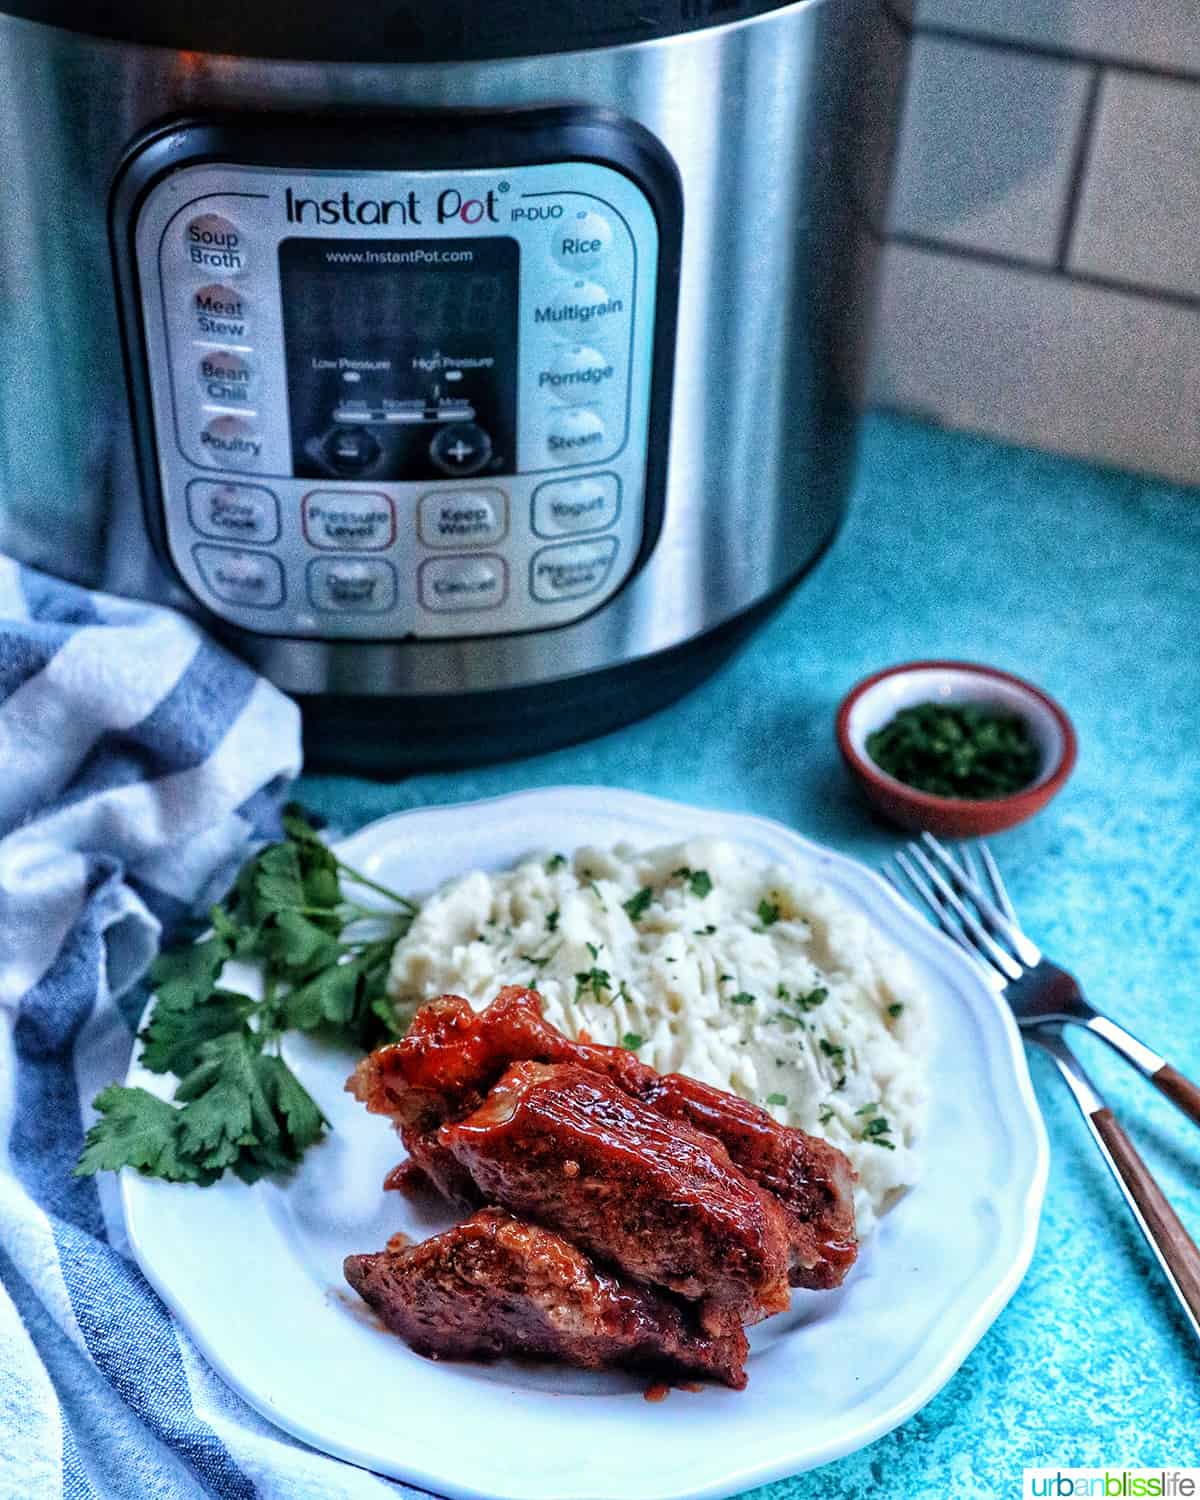 plate of Instant Pot country style ribs and mashed potatoes with herbs in front of an Instant Pot.